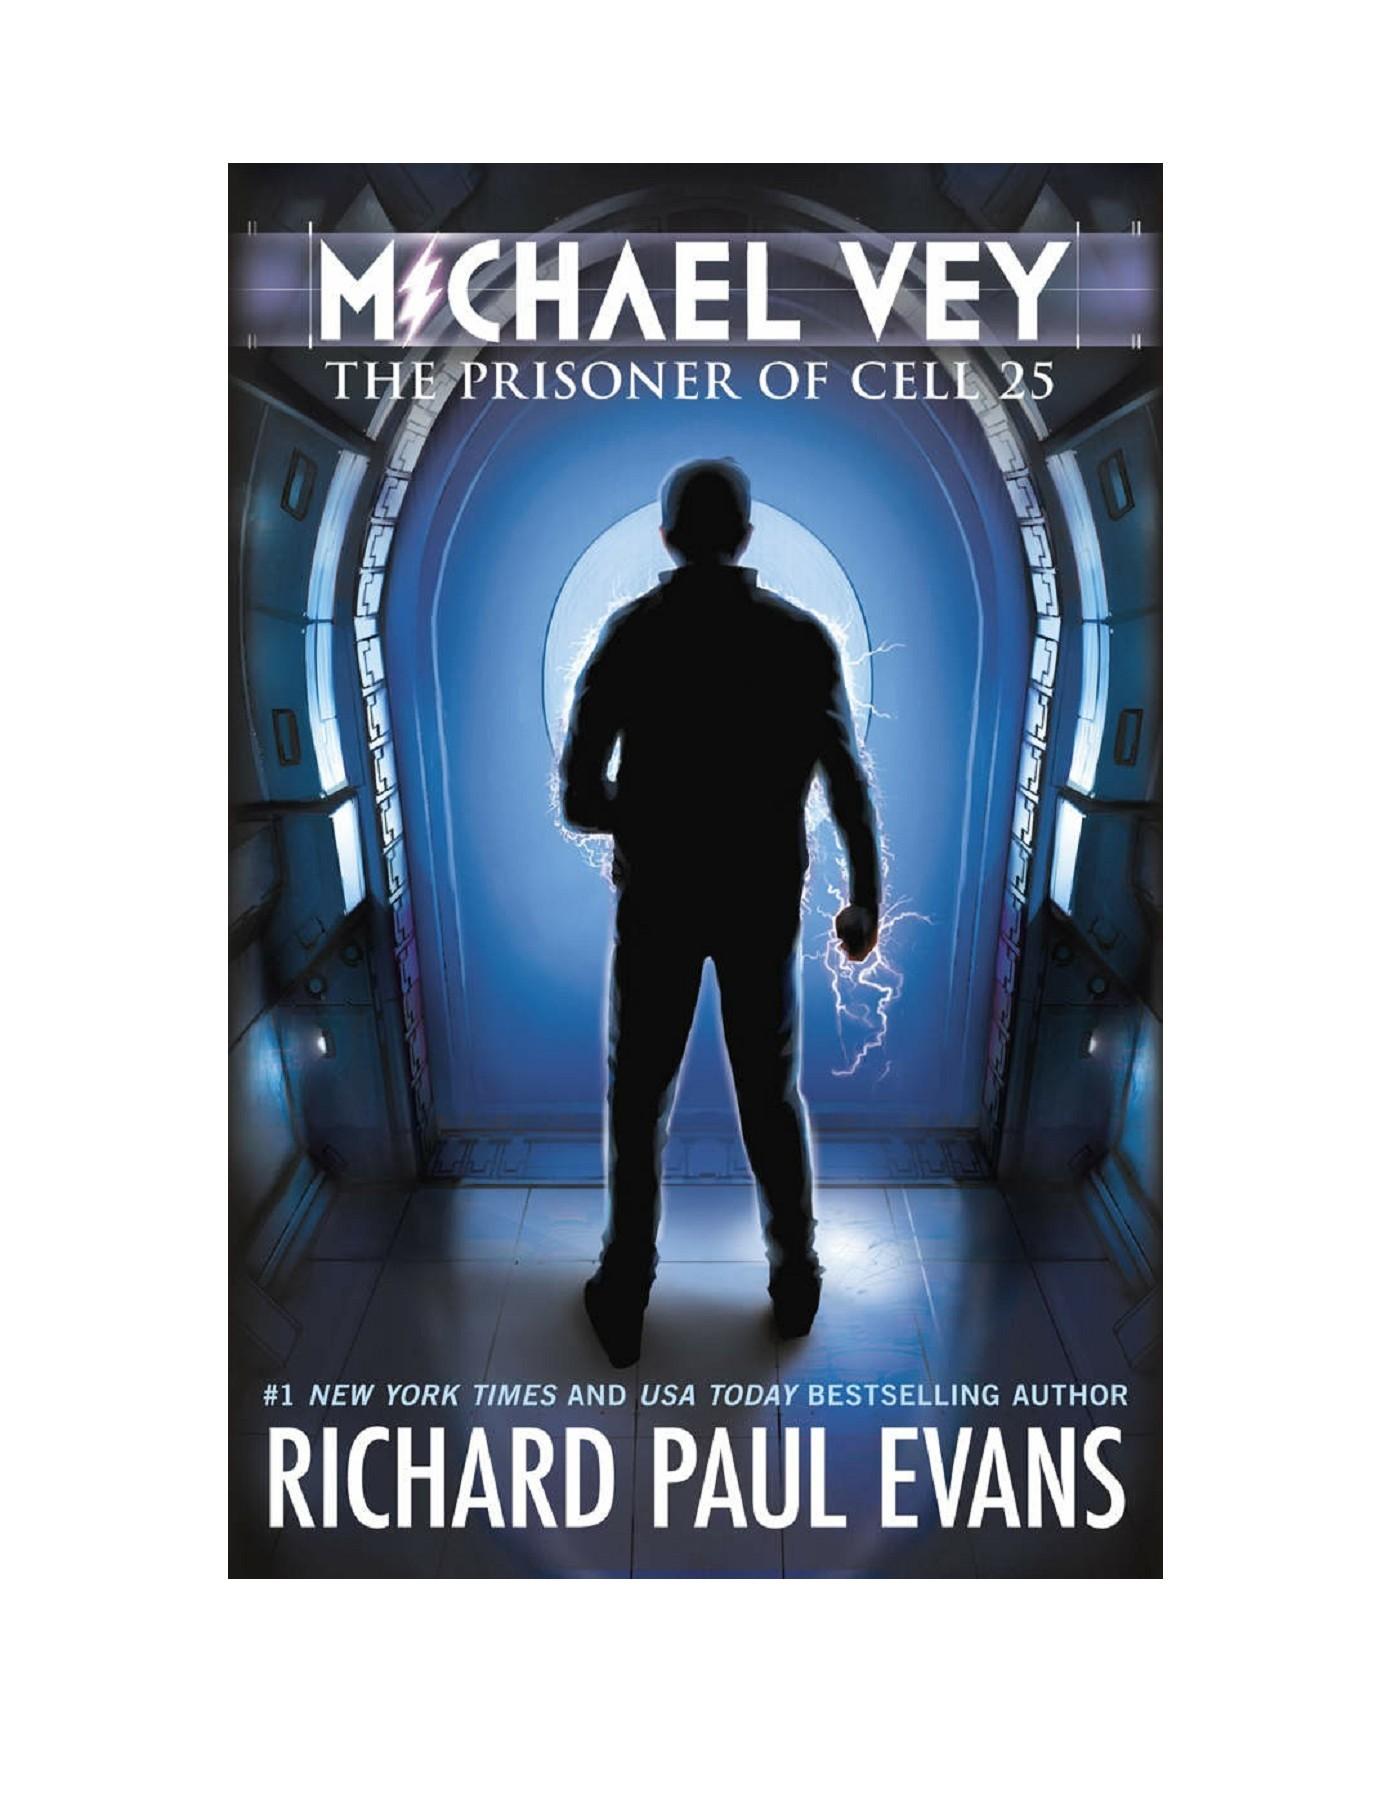 Michael Vey the Prisoners of Cell 25 Pages 1